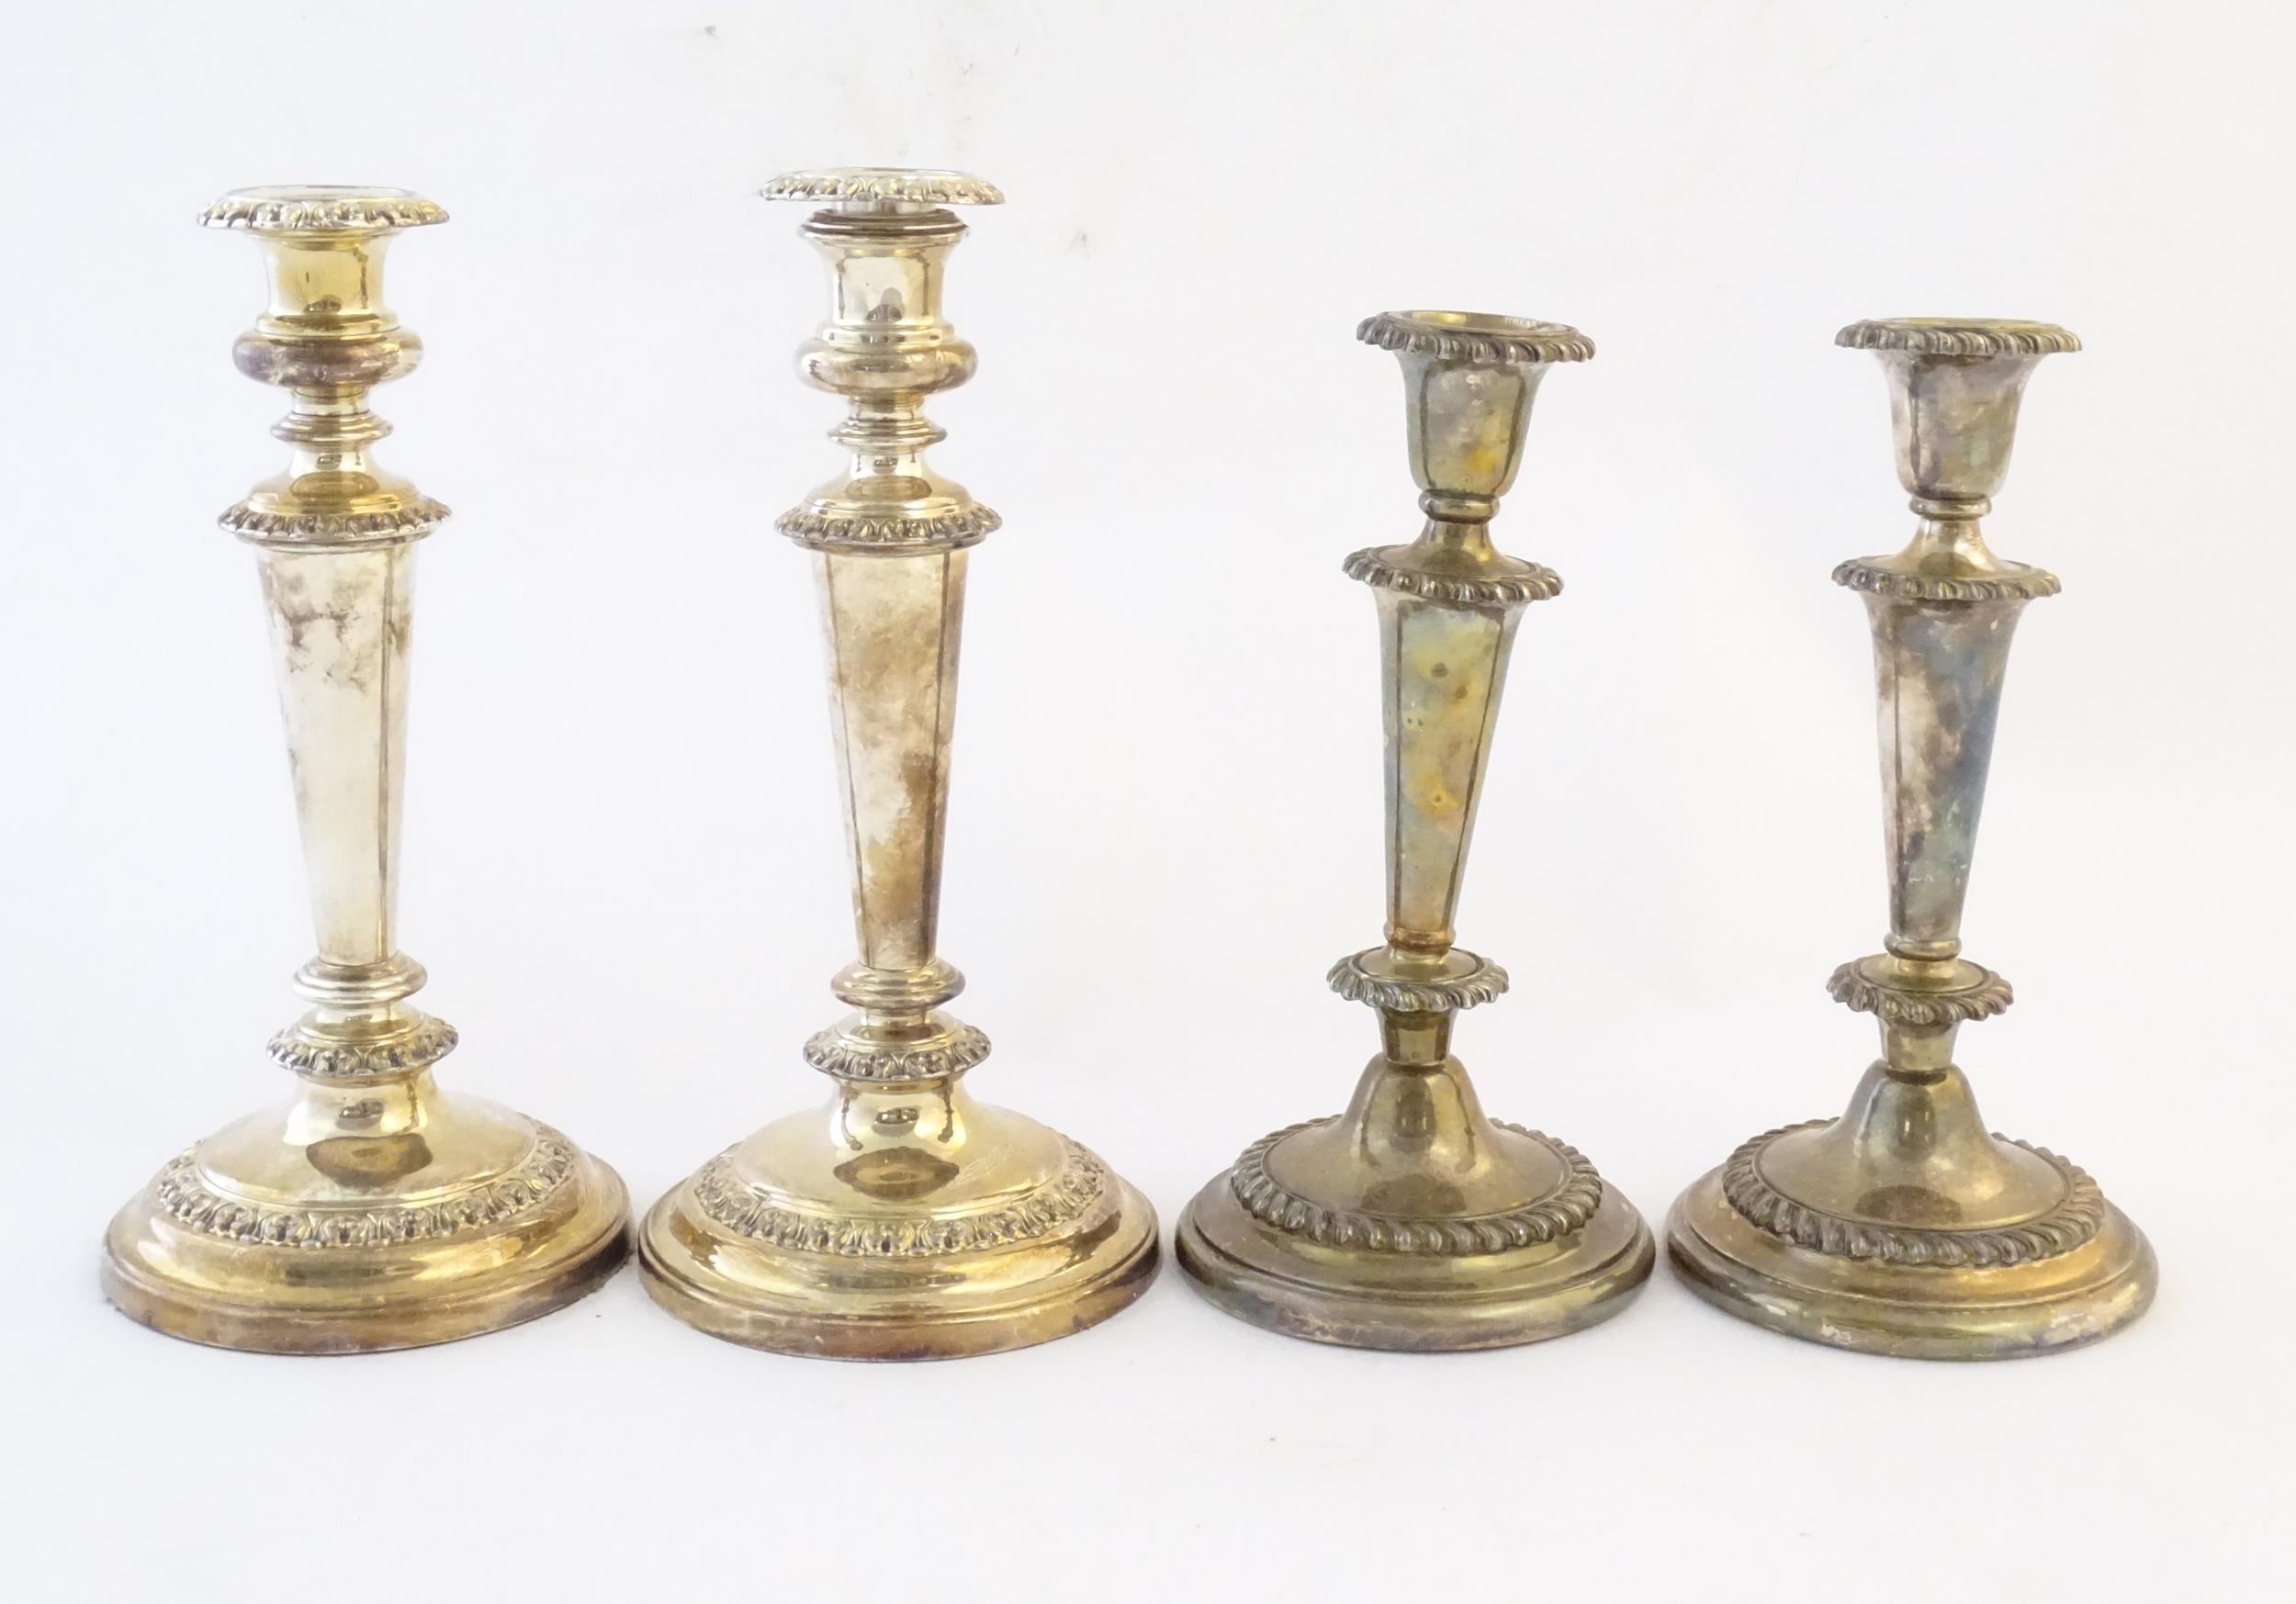 A pair of silver plate candlesticks. Together with another pair of silver plate candlesticks.